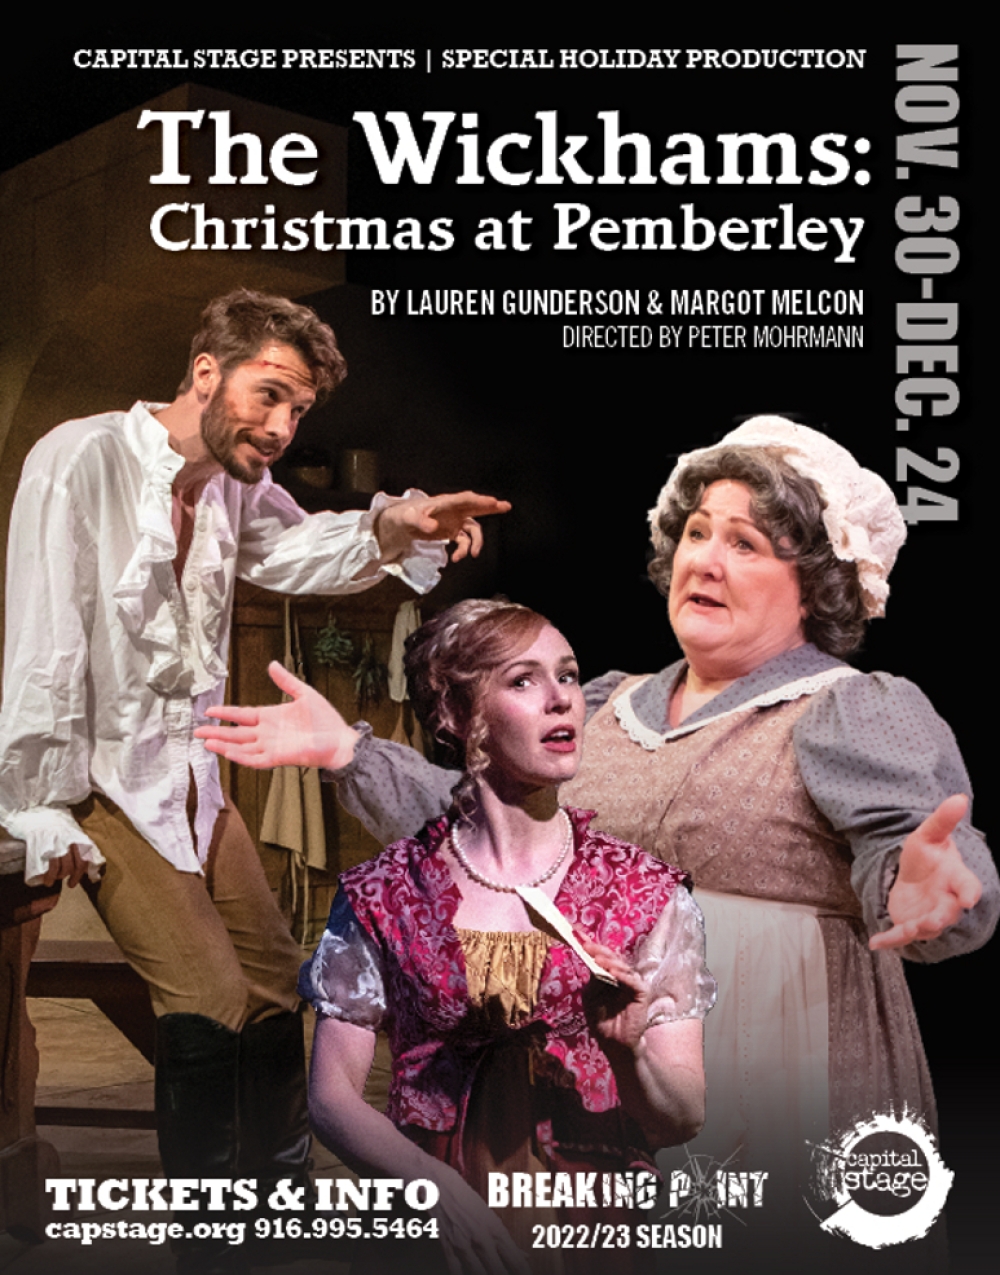 THE WICKHAMS: CHRISTMAS AT PEMBERLEY at Capital Stage